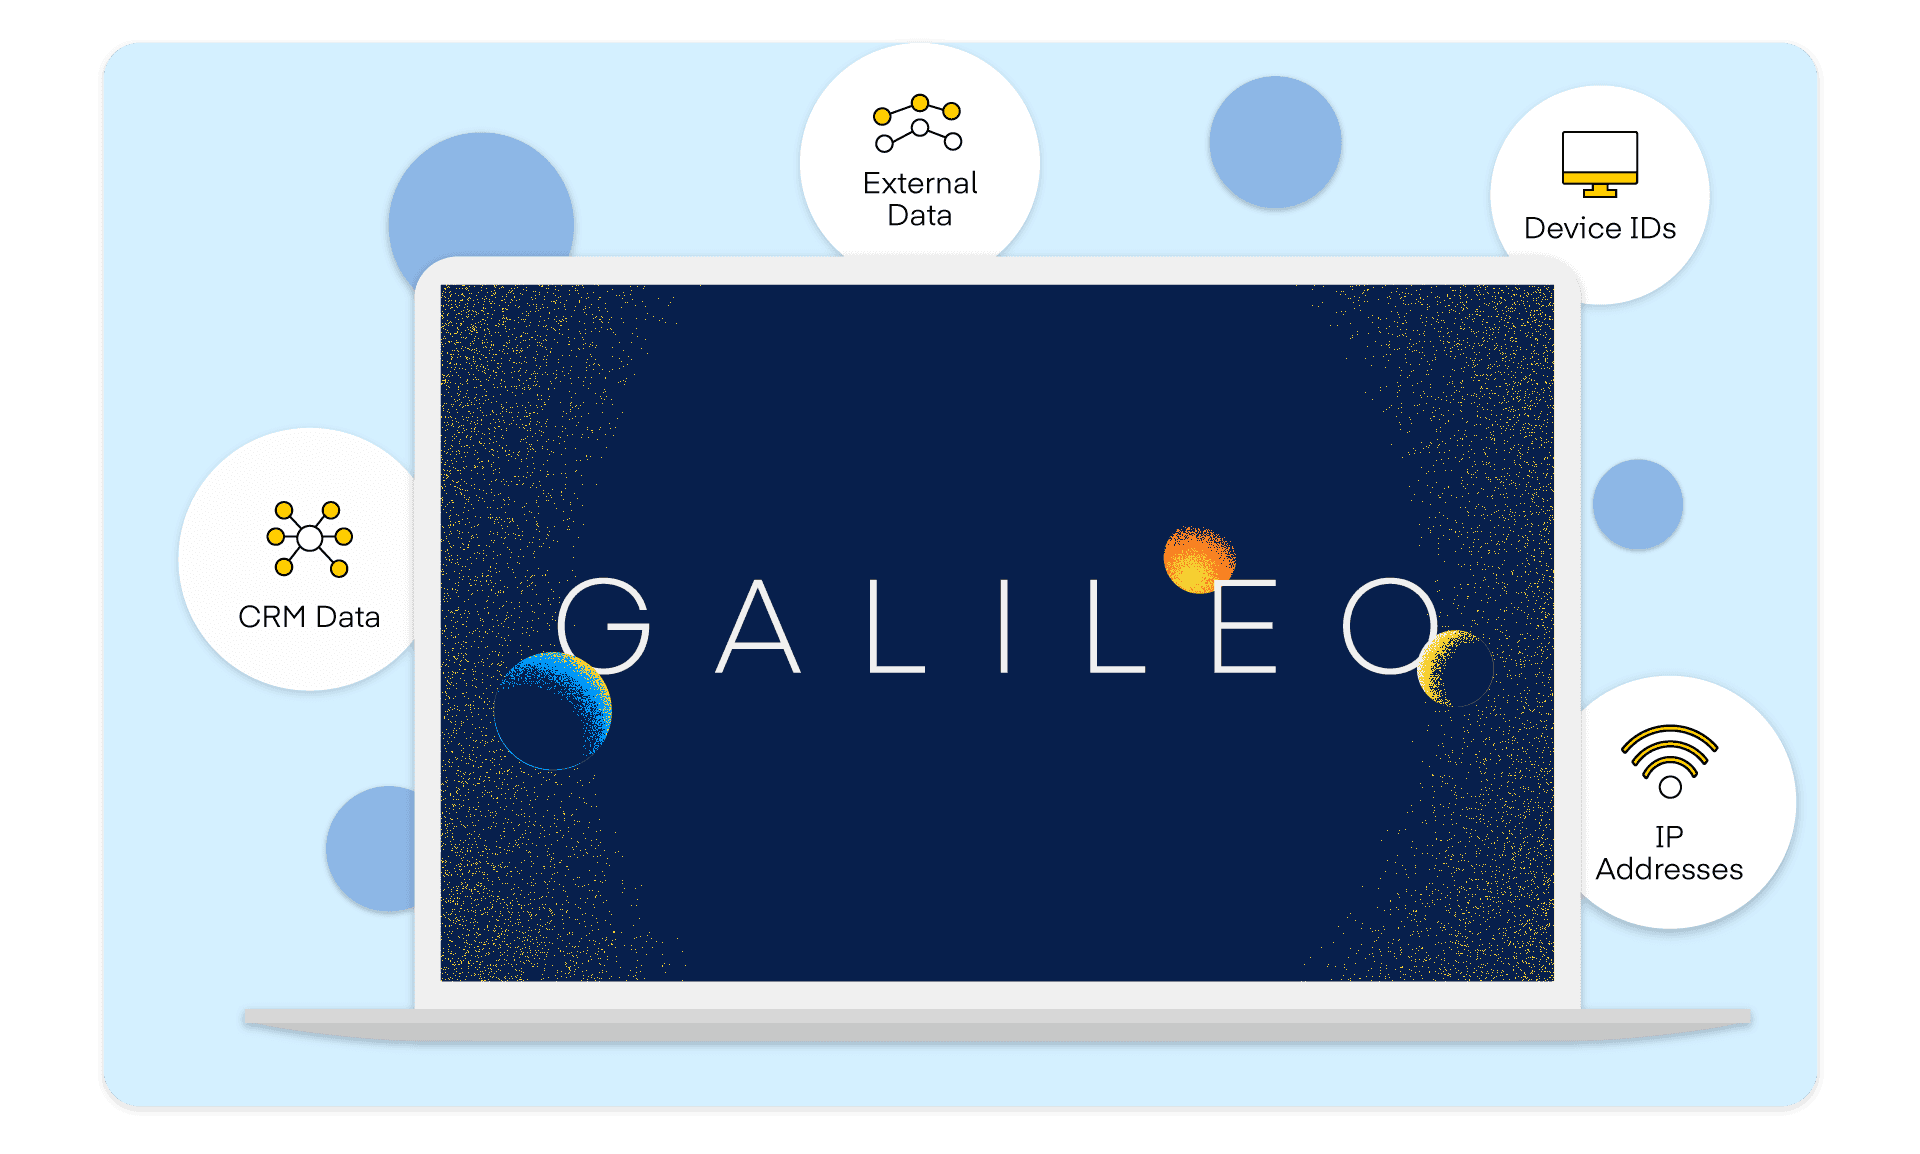 Graphic of a laptop with "Galileo" by The Trade Desk on the screen